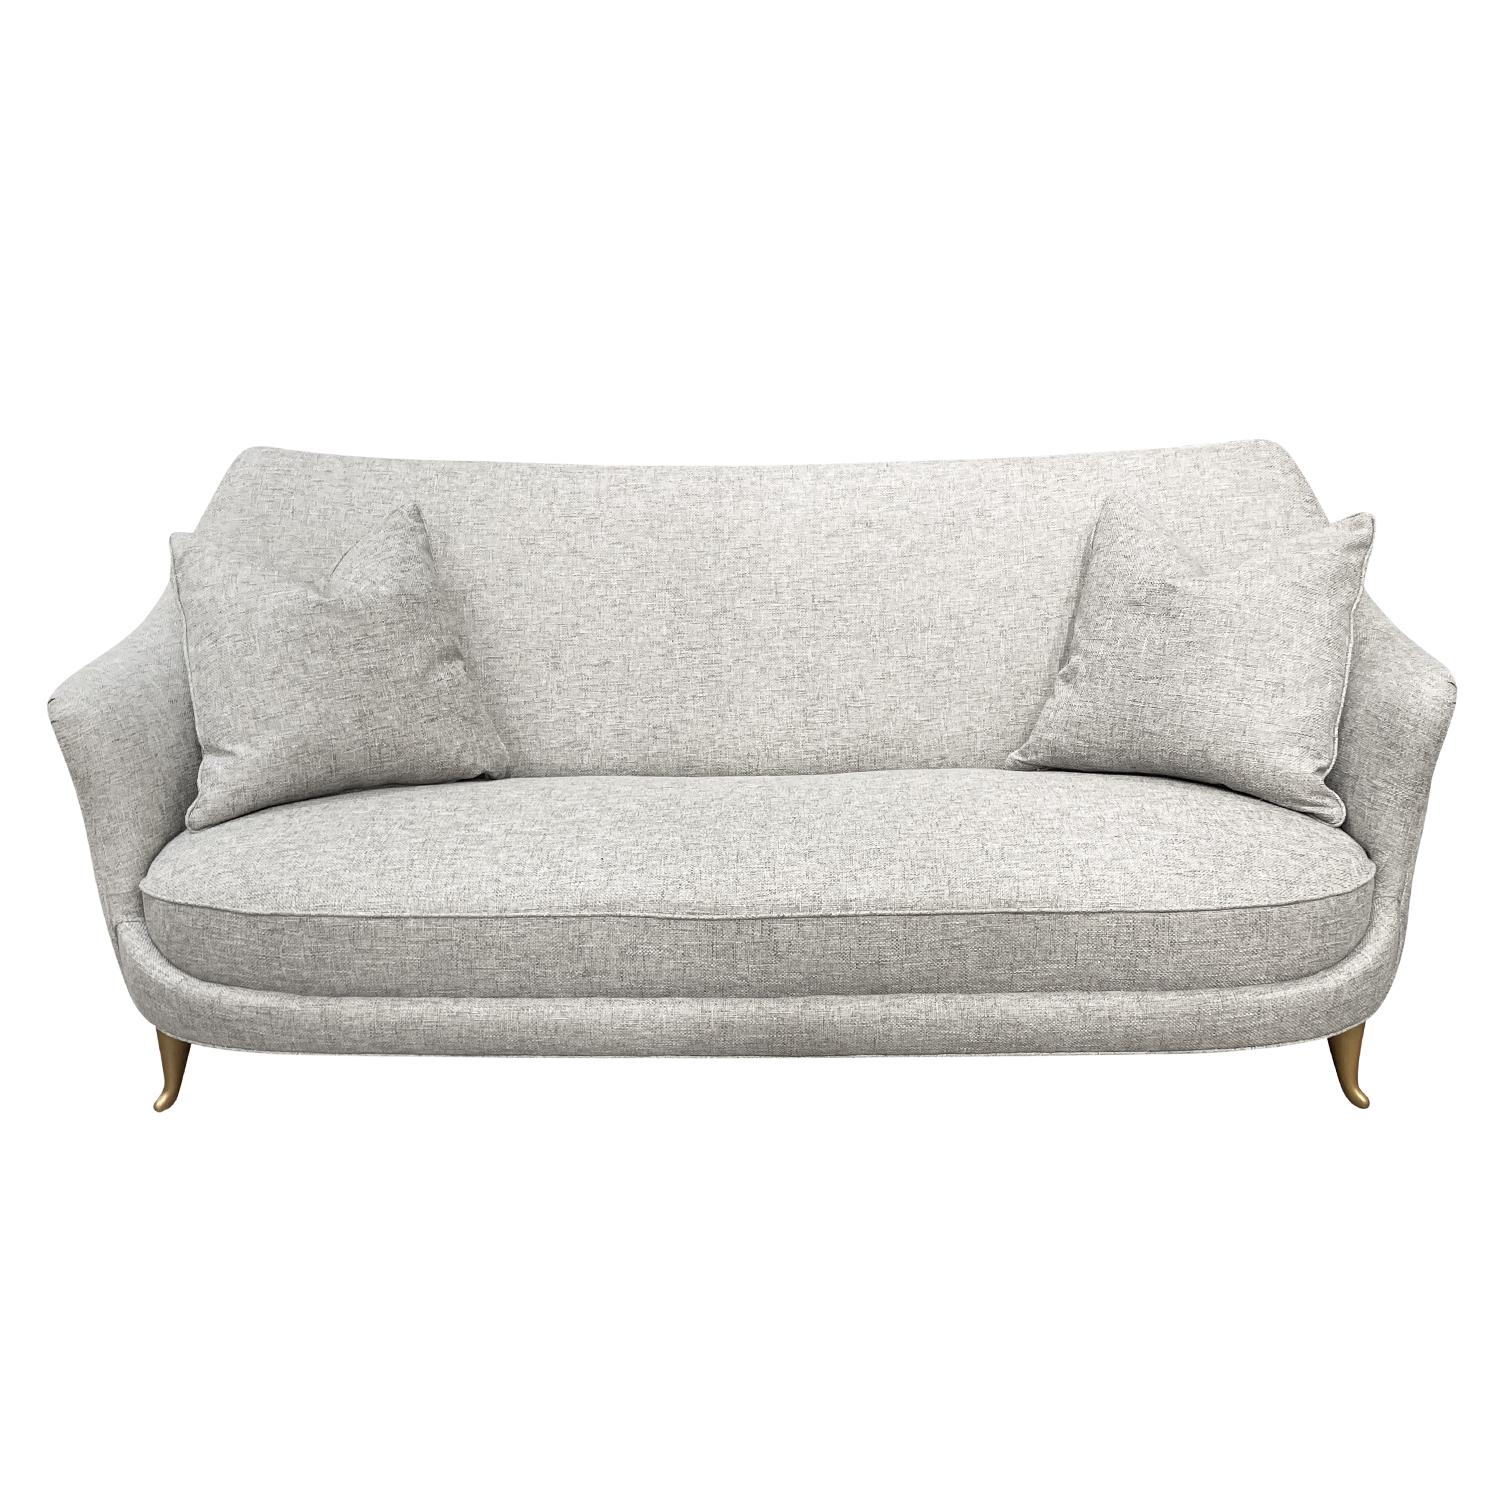 A vintage Mid-Century Modern Italian two seater sofa or settee with two pillows, designed and produced by ISA Bergamo, in good condition. The seat backrest of small divano, canapé has a floating back with gently, slim outstretched arms, supported by